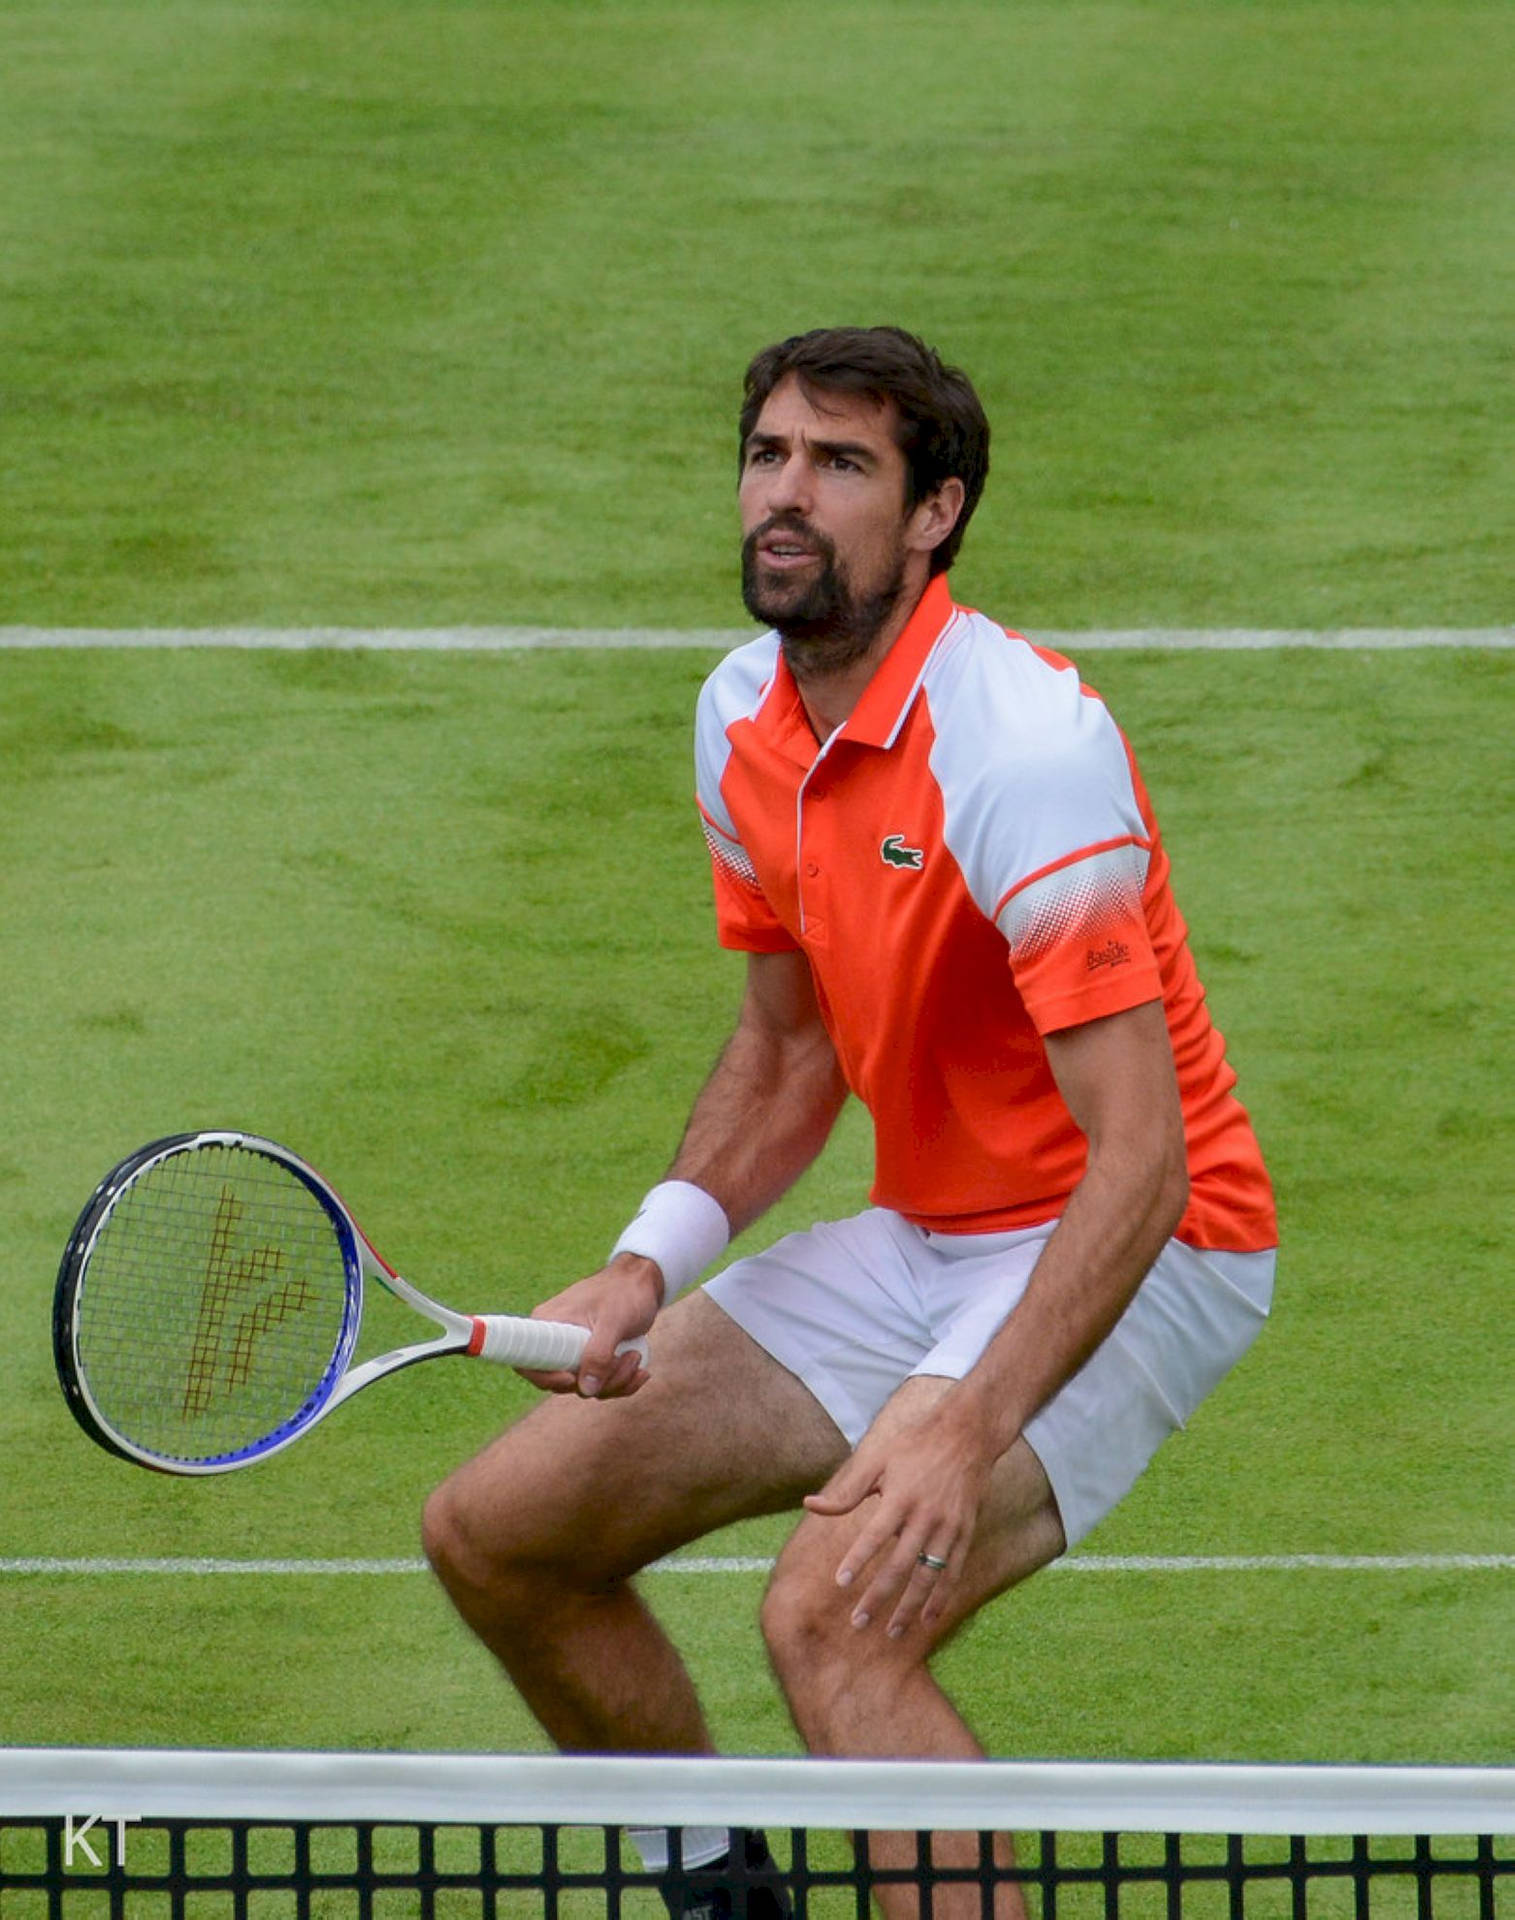 "Professional Tennis Player Jeremy Chardy in Action on a Green Court" Wallpaper